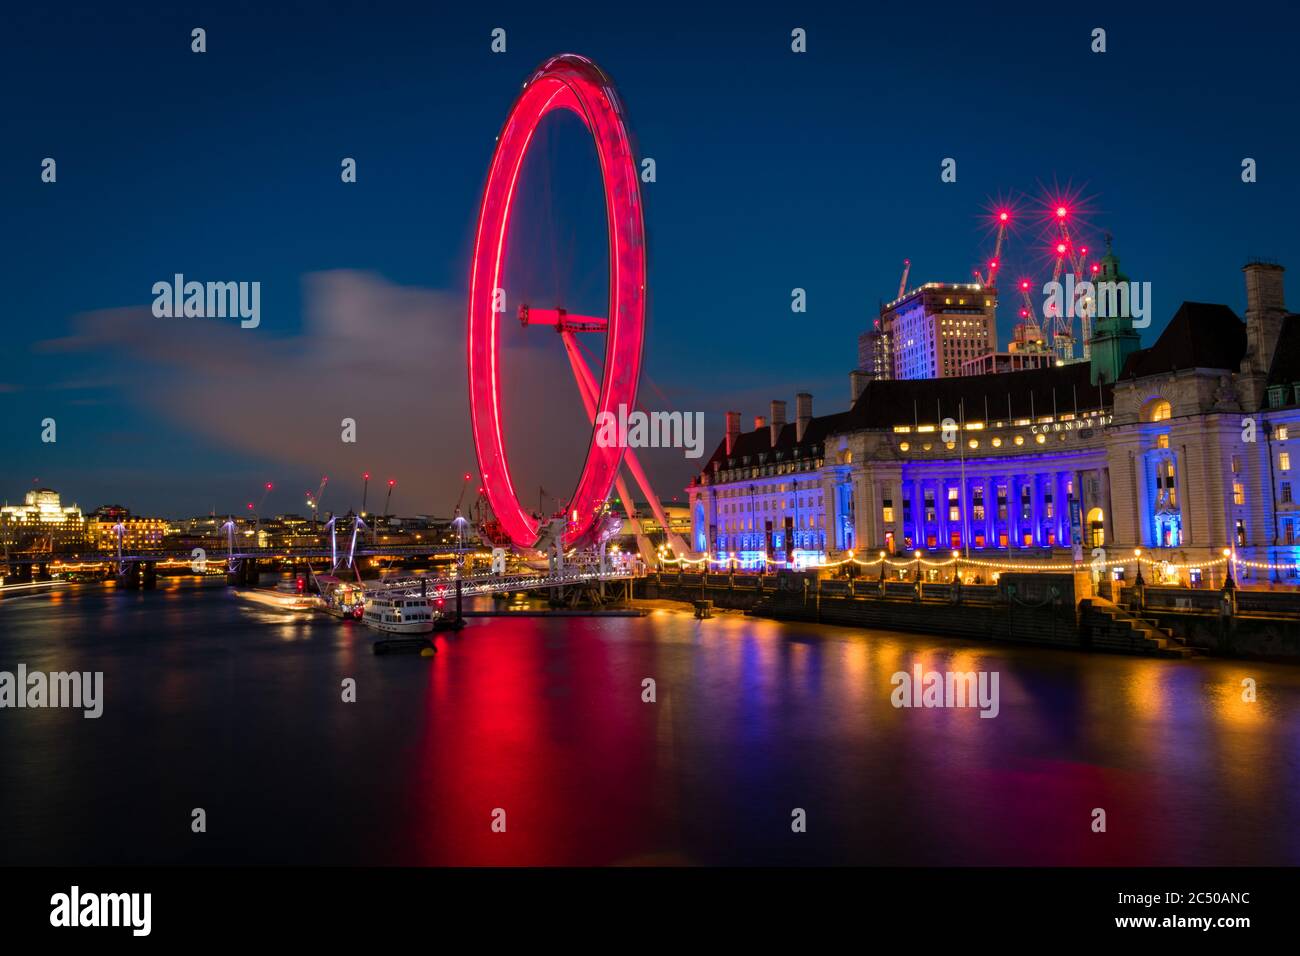 The London Eye and County Hall building at night casting colourful reflections on the Thames river. Stock Photo